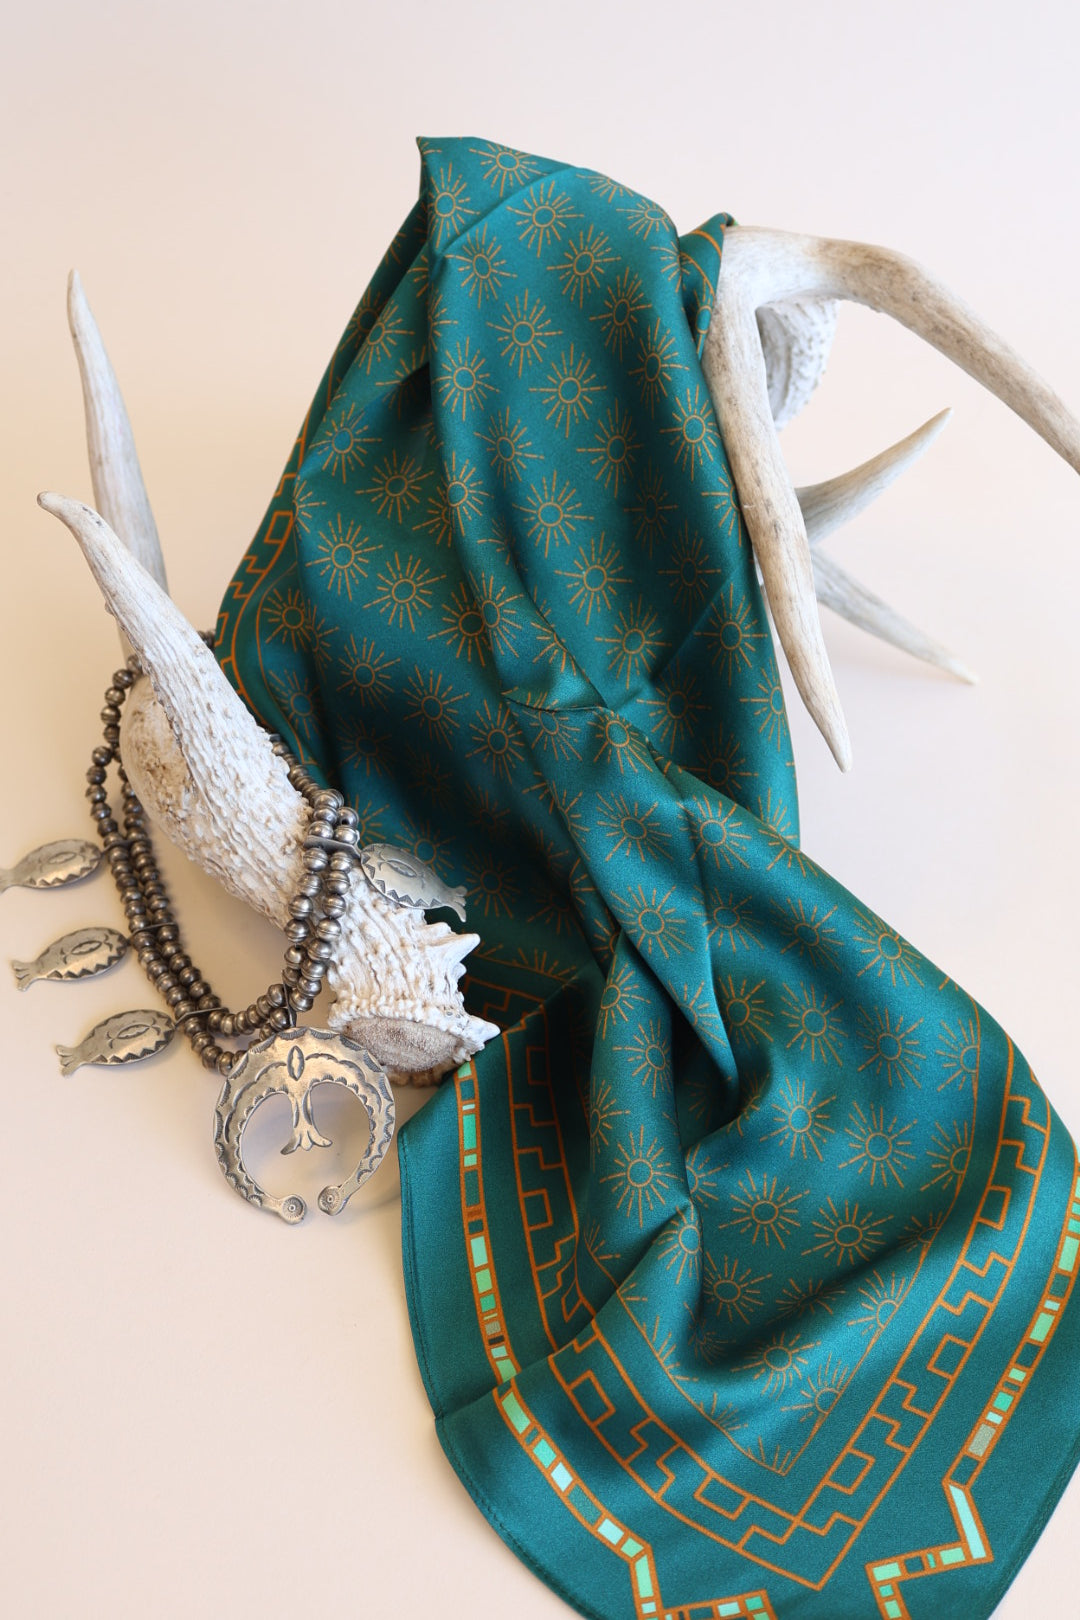 The Emerald Scarf